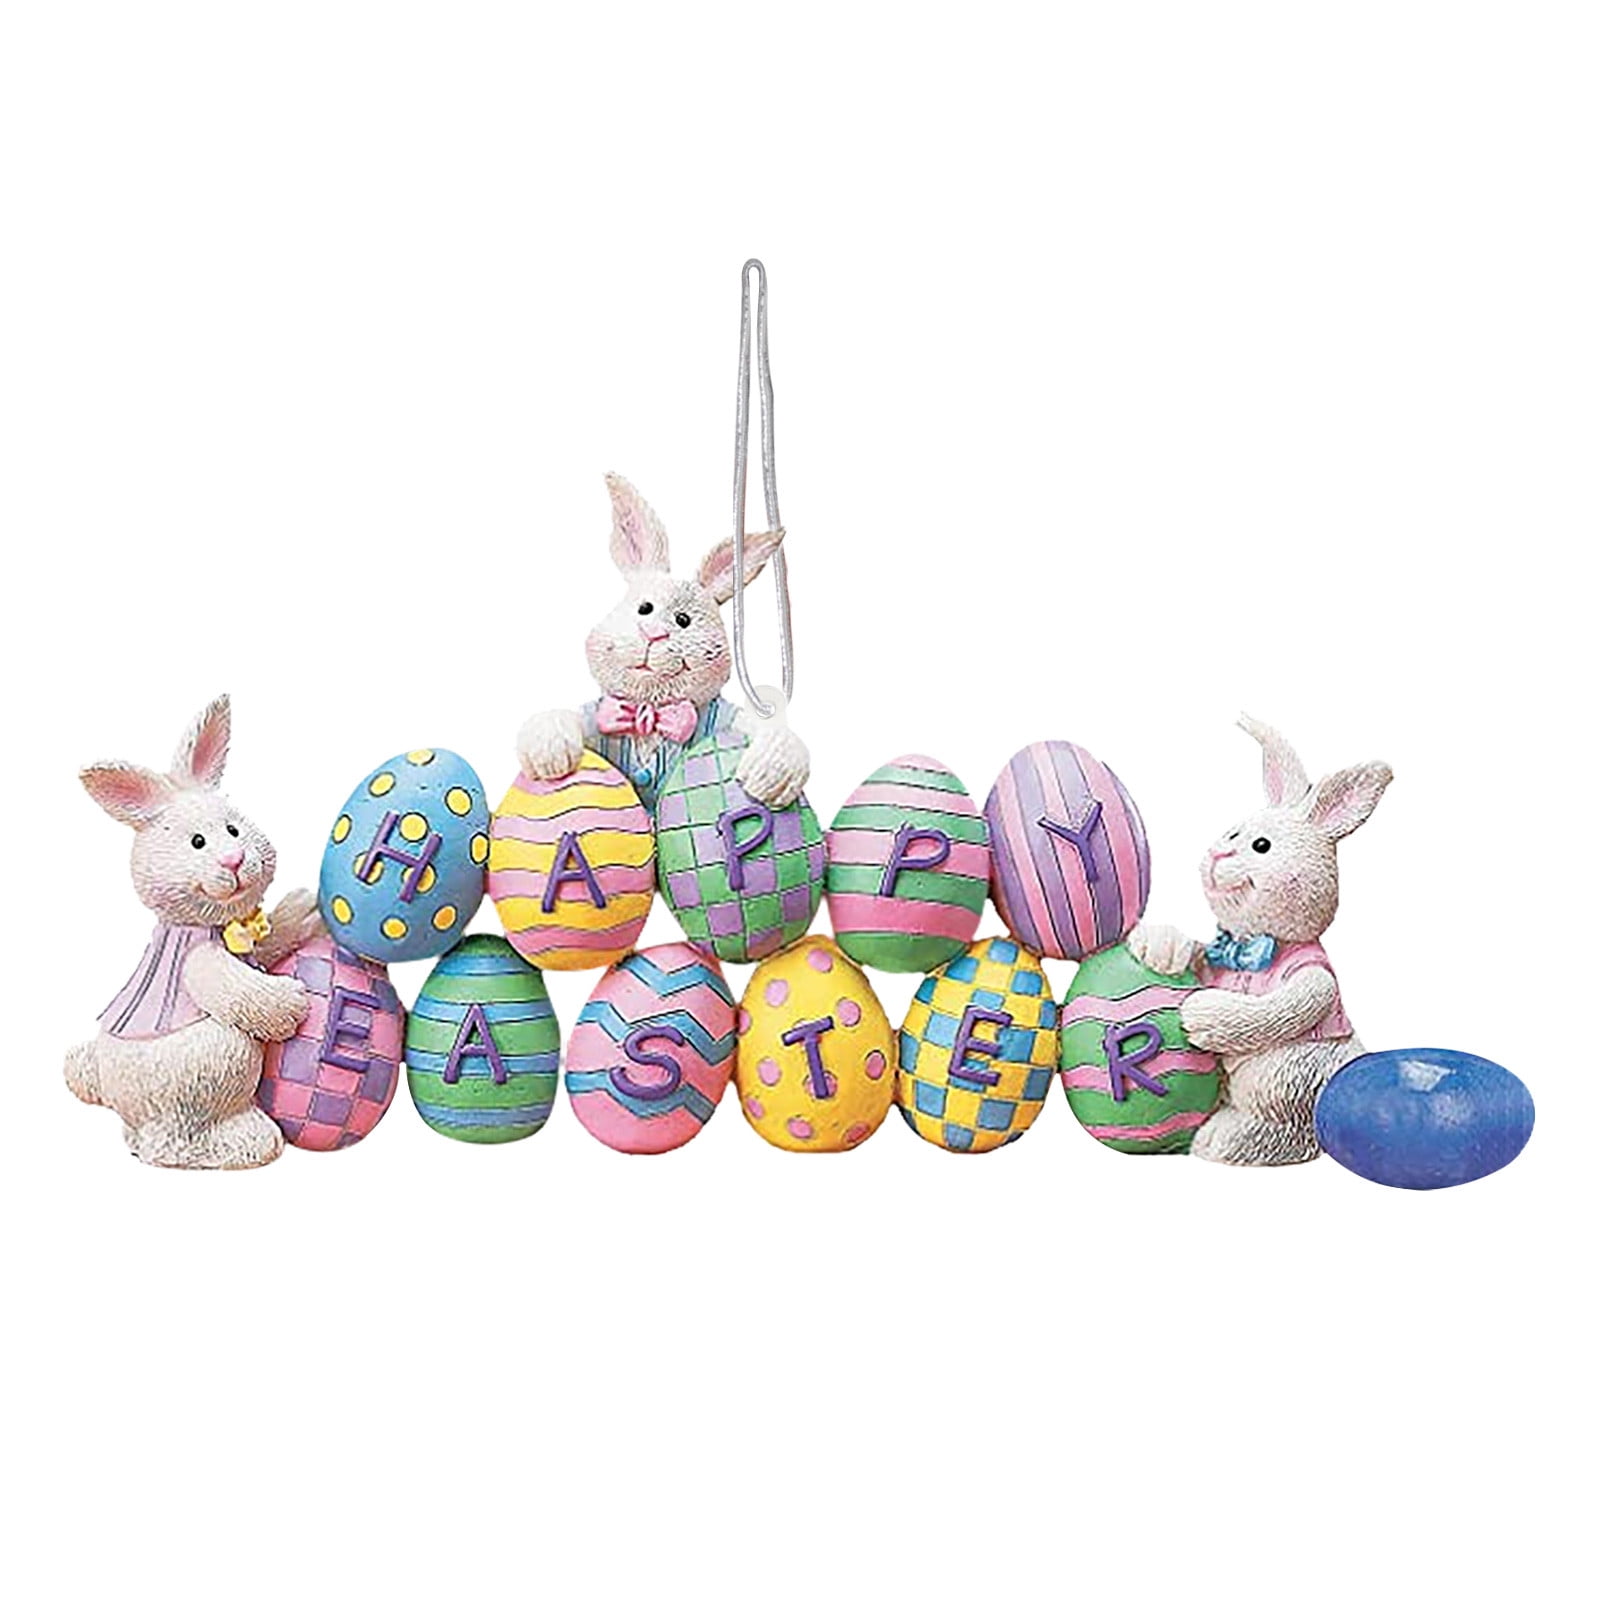 Details about   Happy Easter Party Home Decor Easter Decorations Hanging Crafts Bunny Pendant 